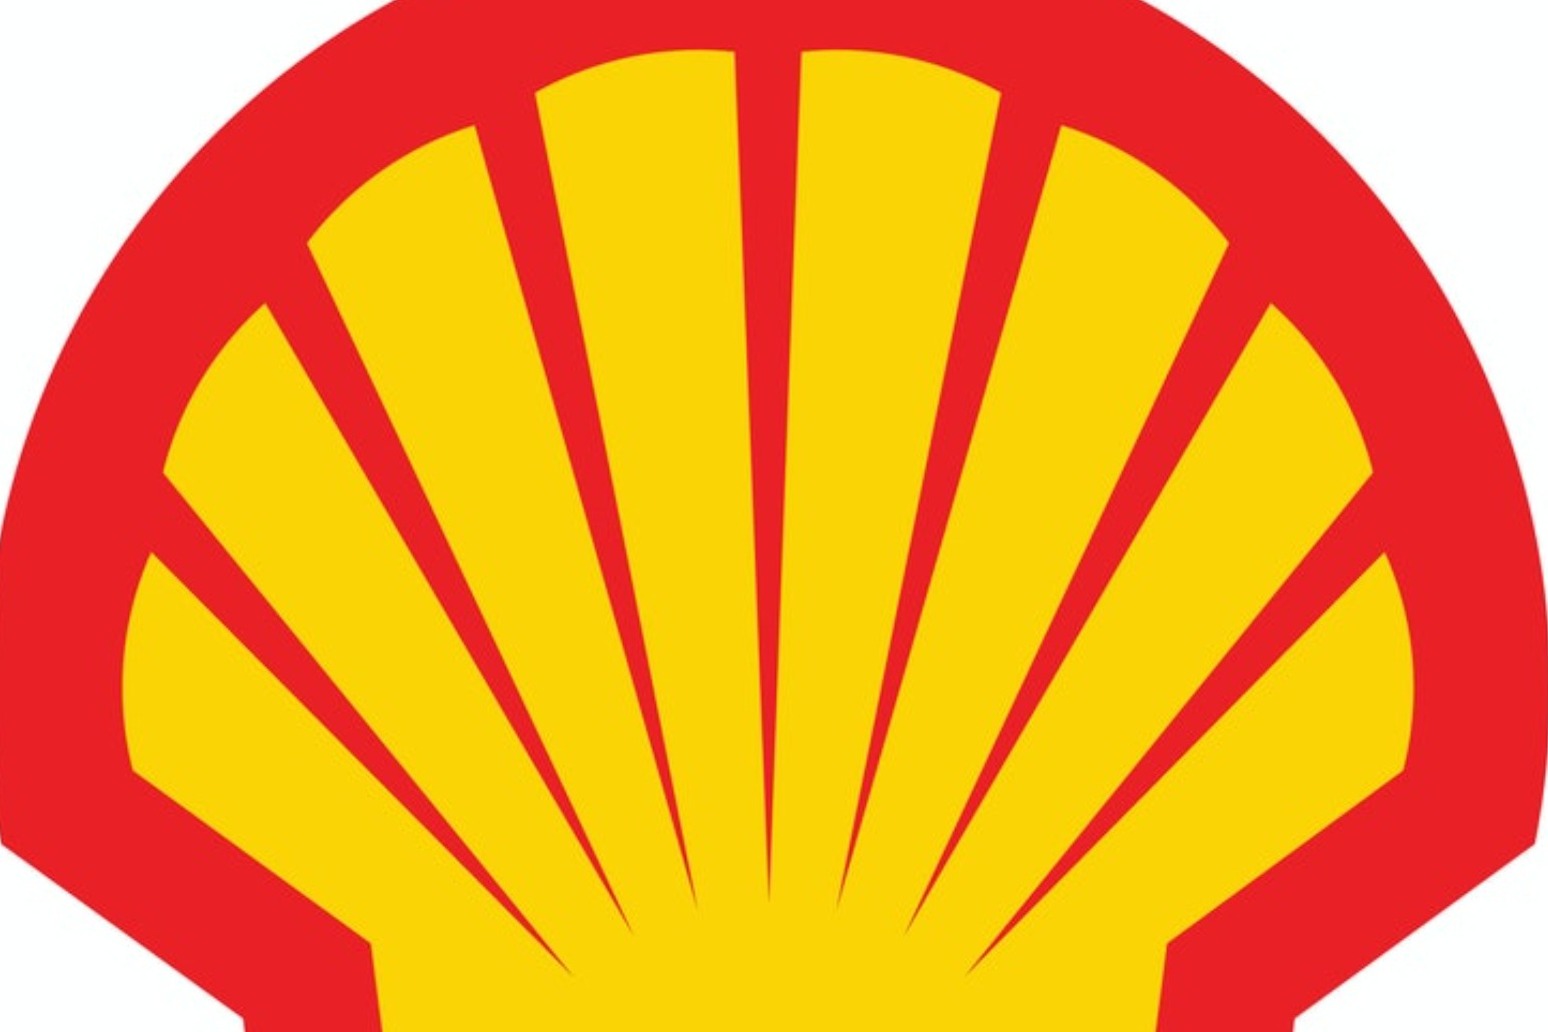 Shell to slash up to 9,000 jobs worldwide 